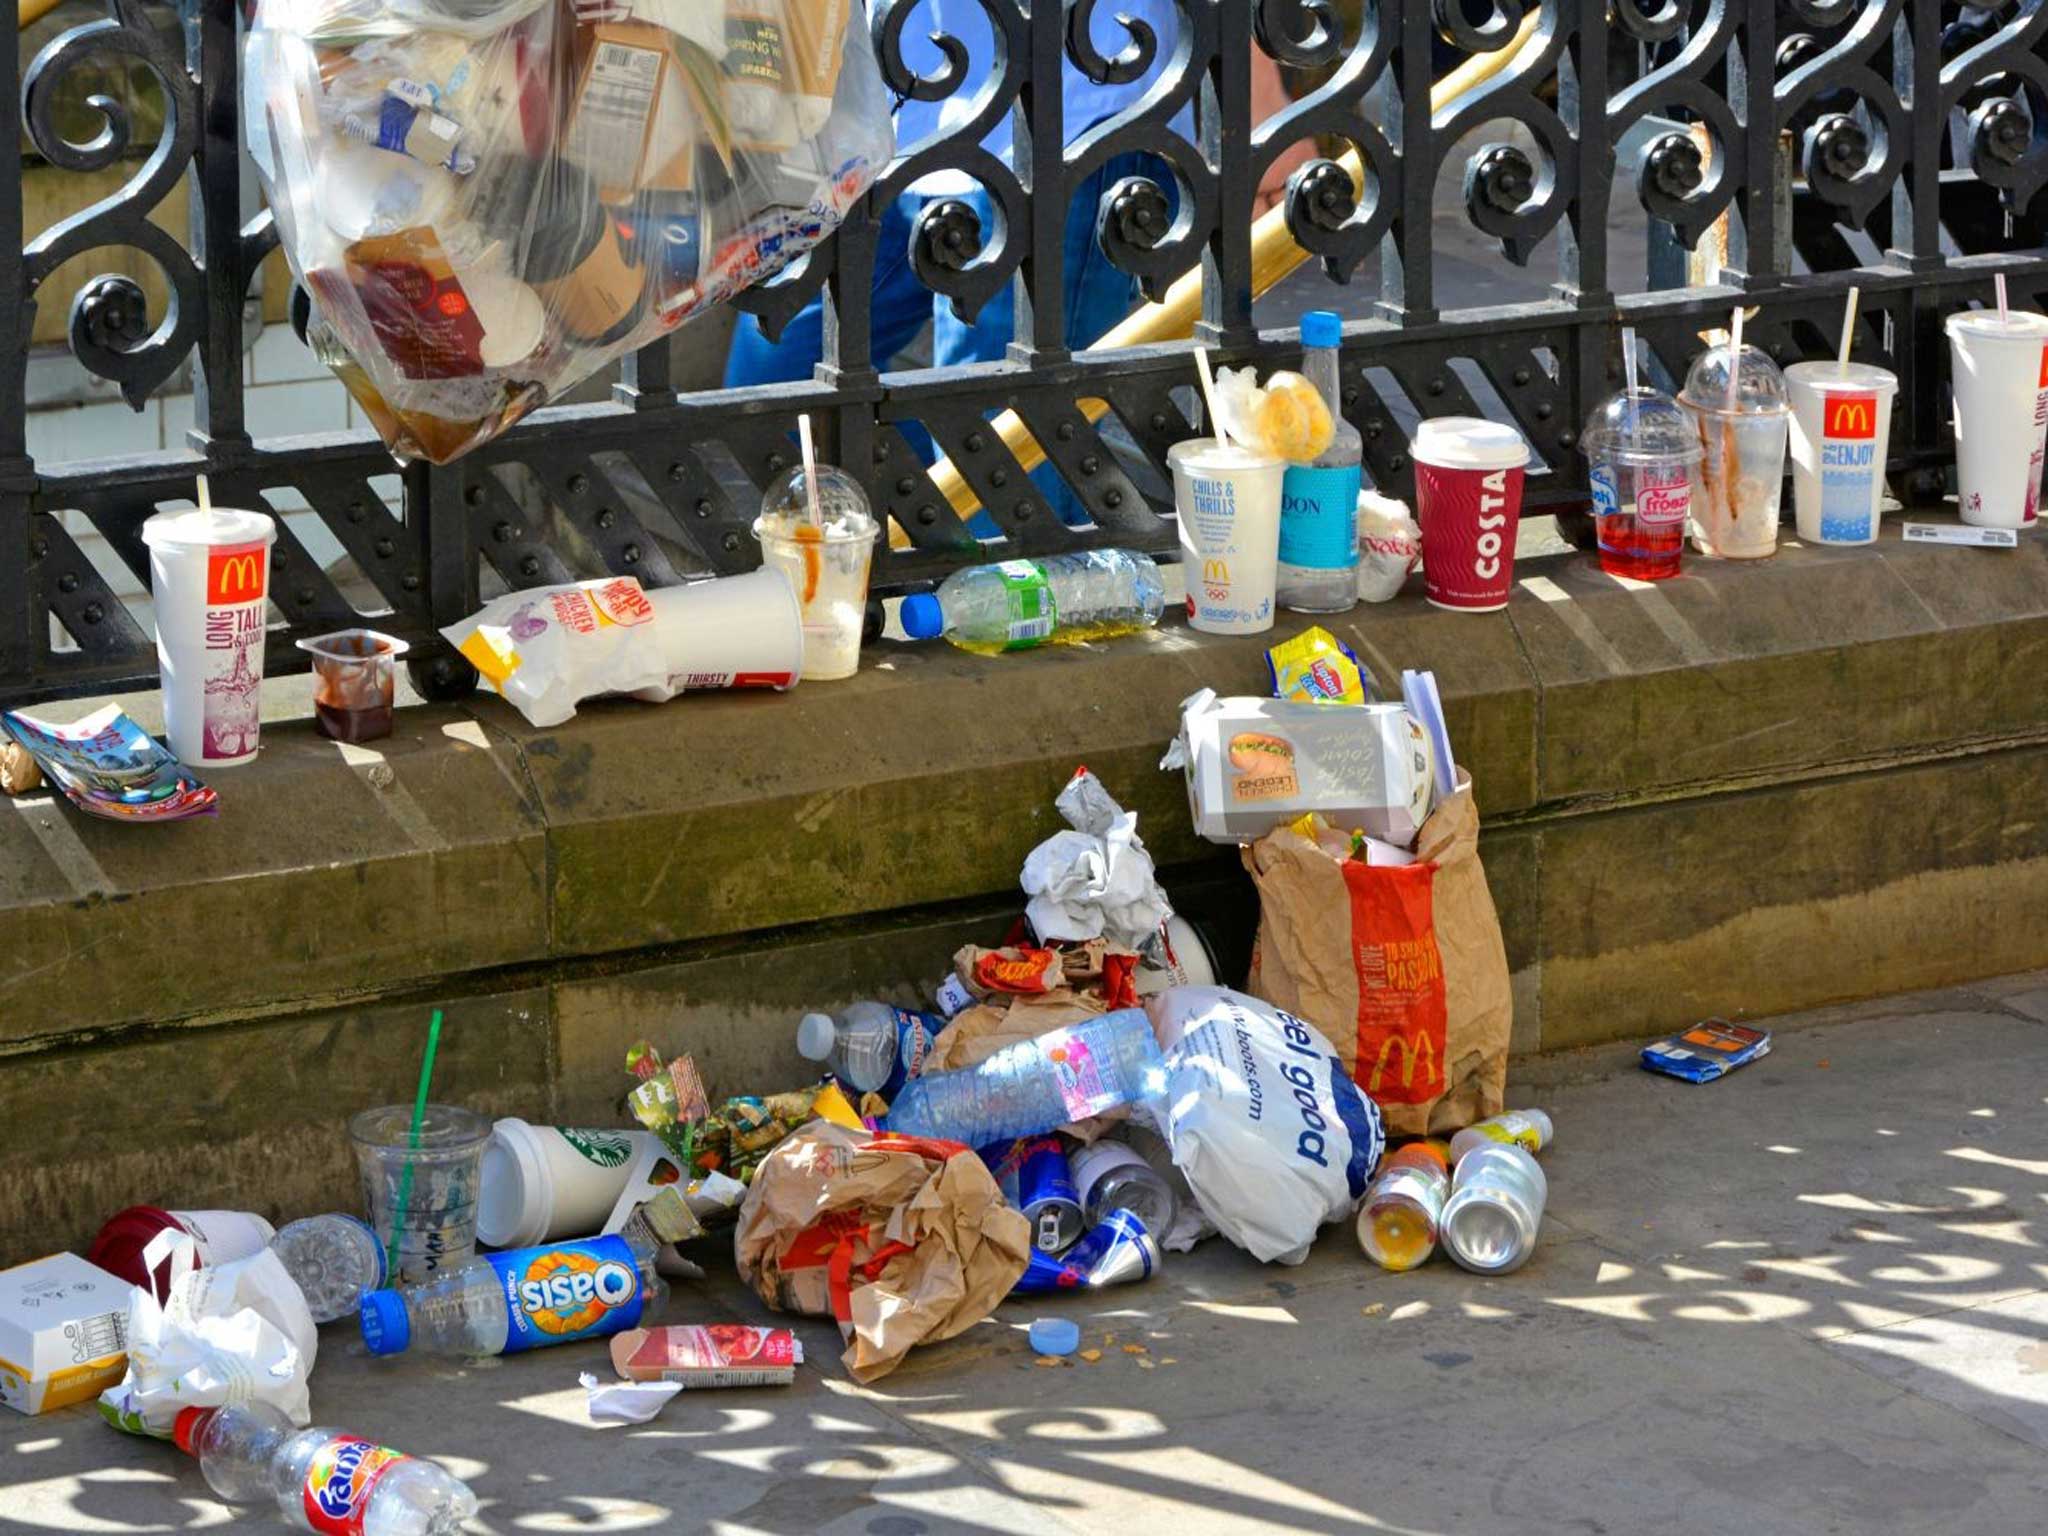 Litter and dog-fouling worry British people as much as global warming